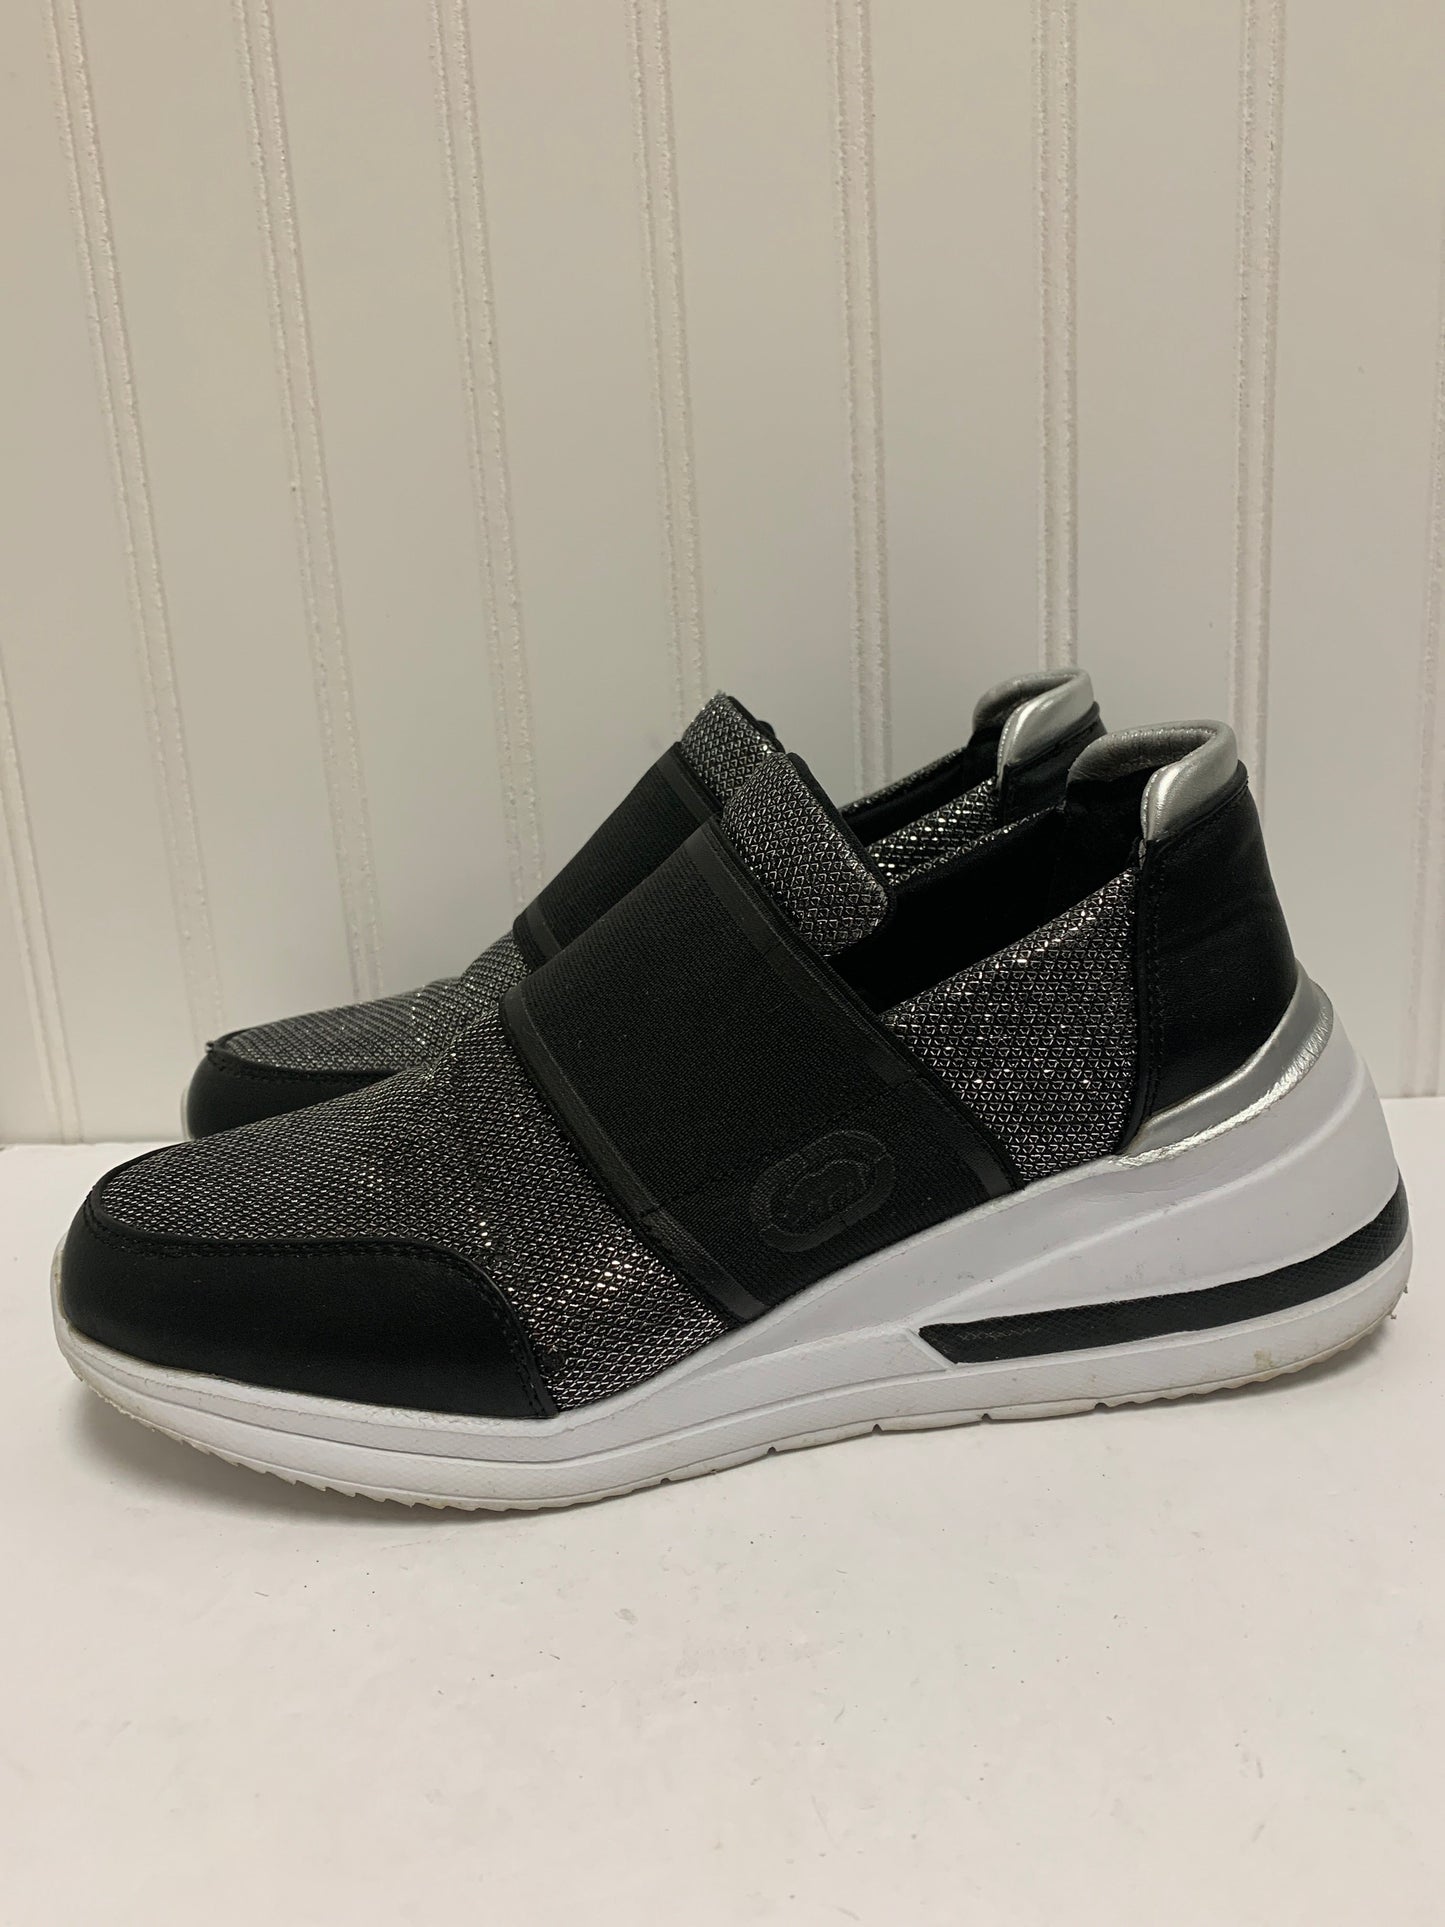 Shoes Sneakers Platform By Echo  Size: 8.5